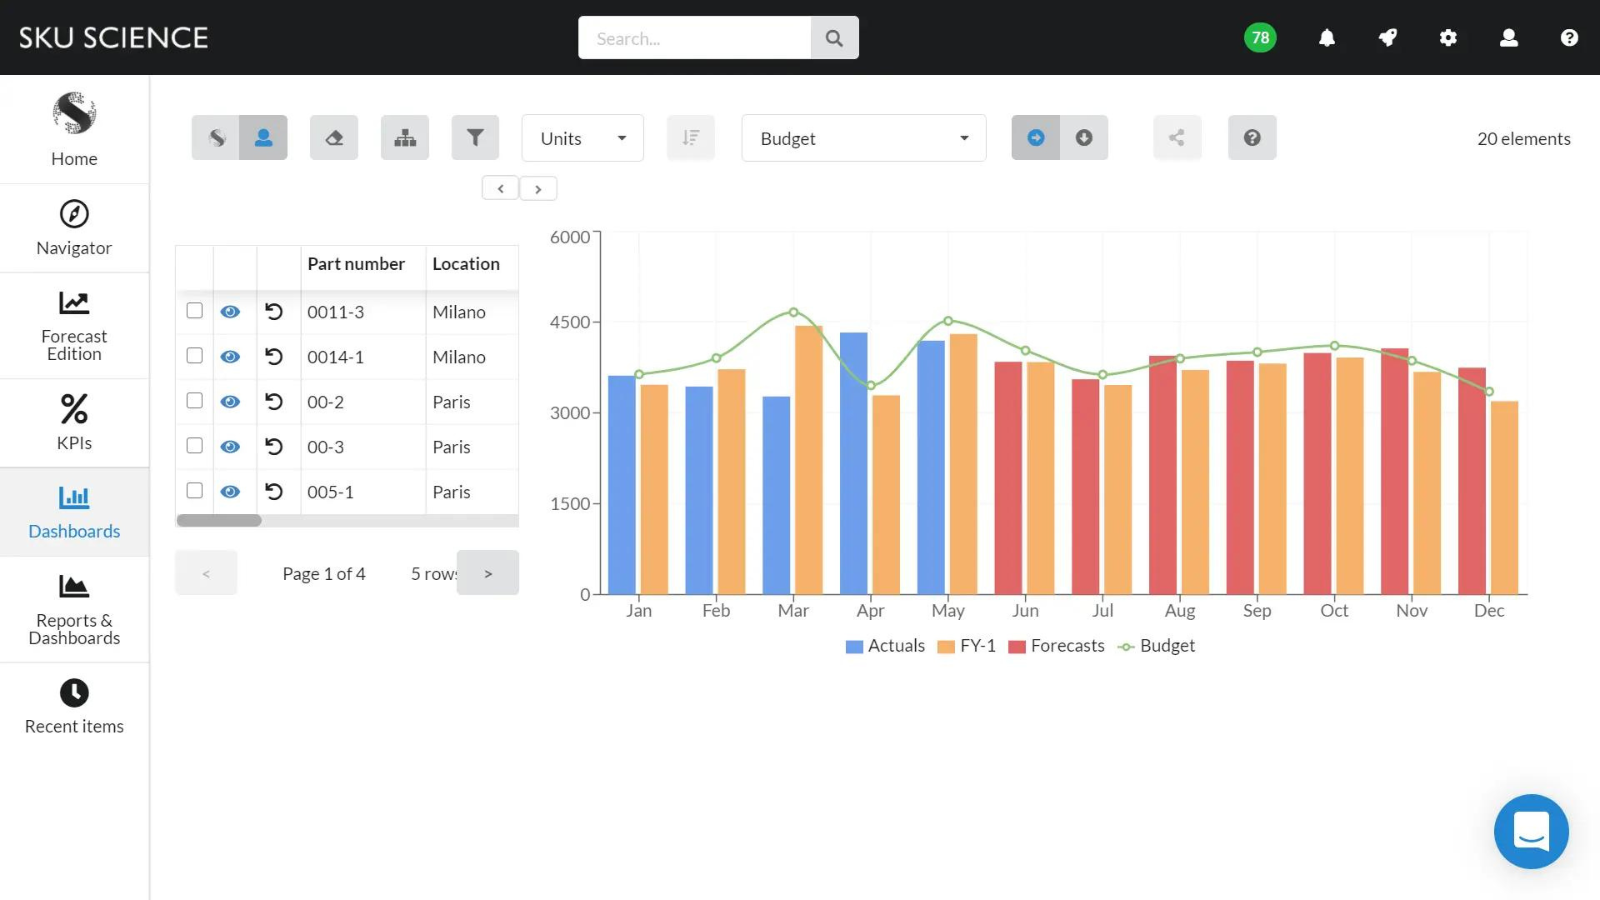 SKU Science - Dashboard with forecasts and annual budget